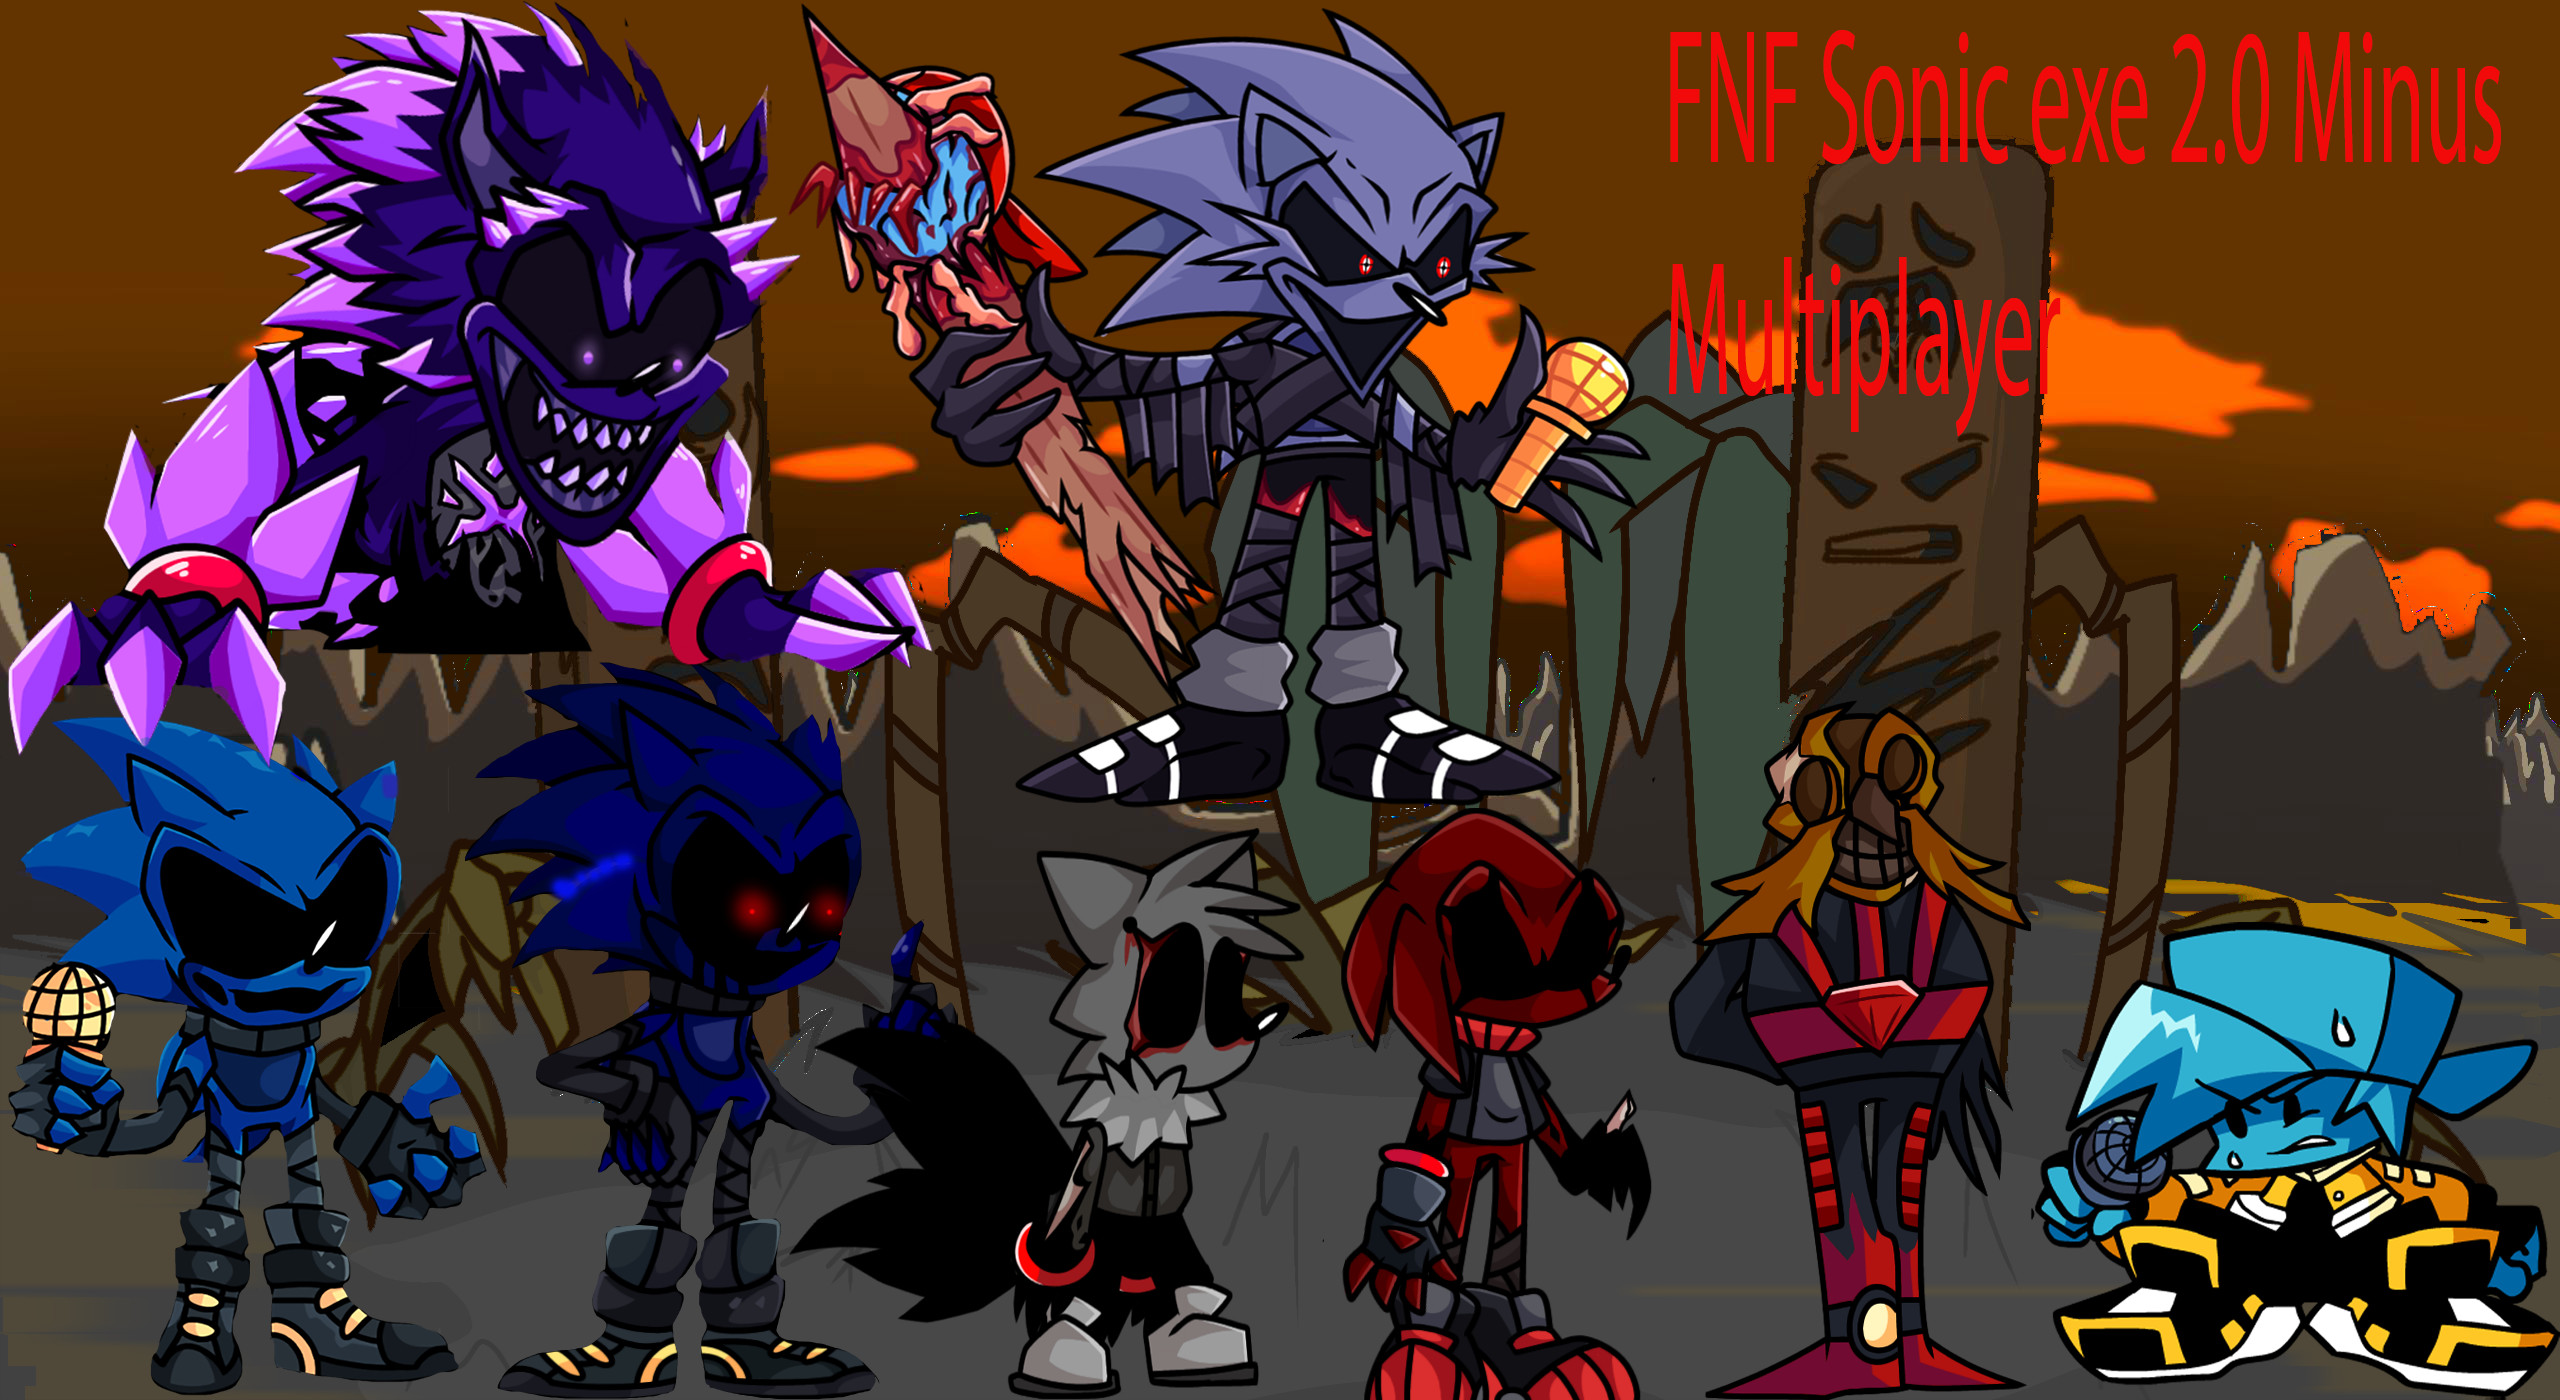 Fnf sonic exe the last round